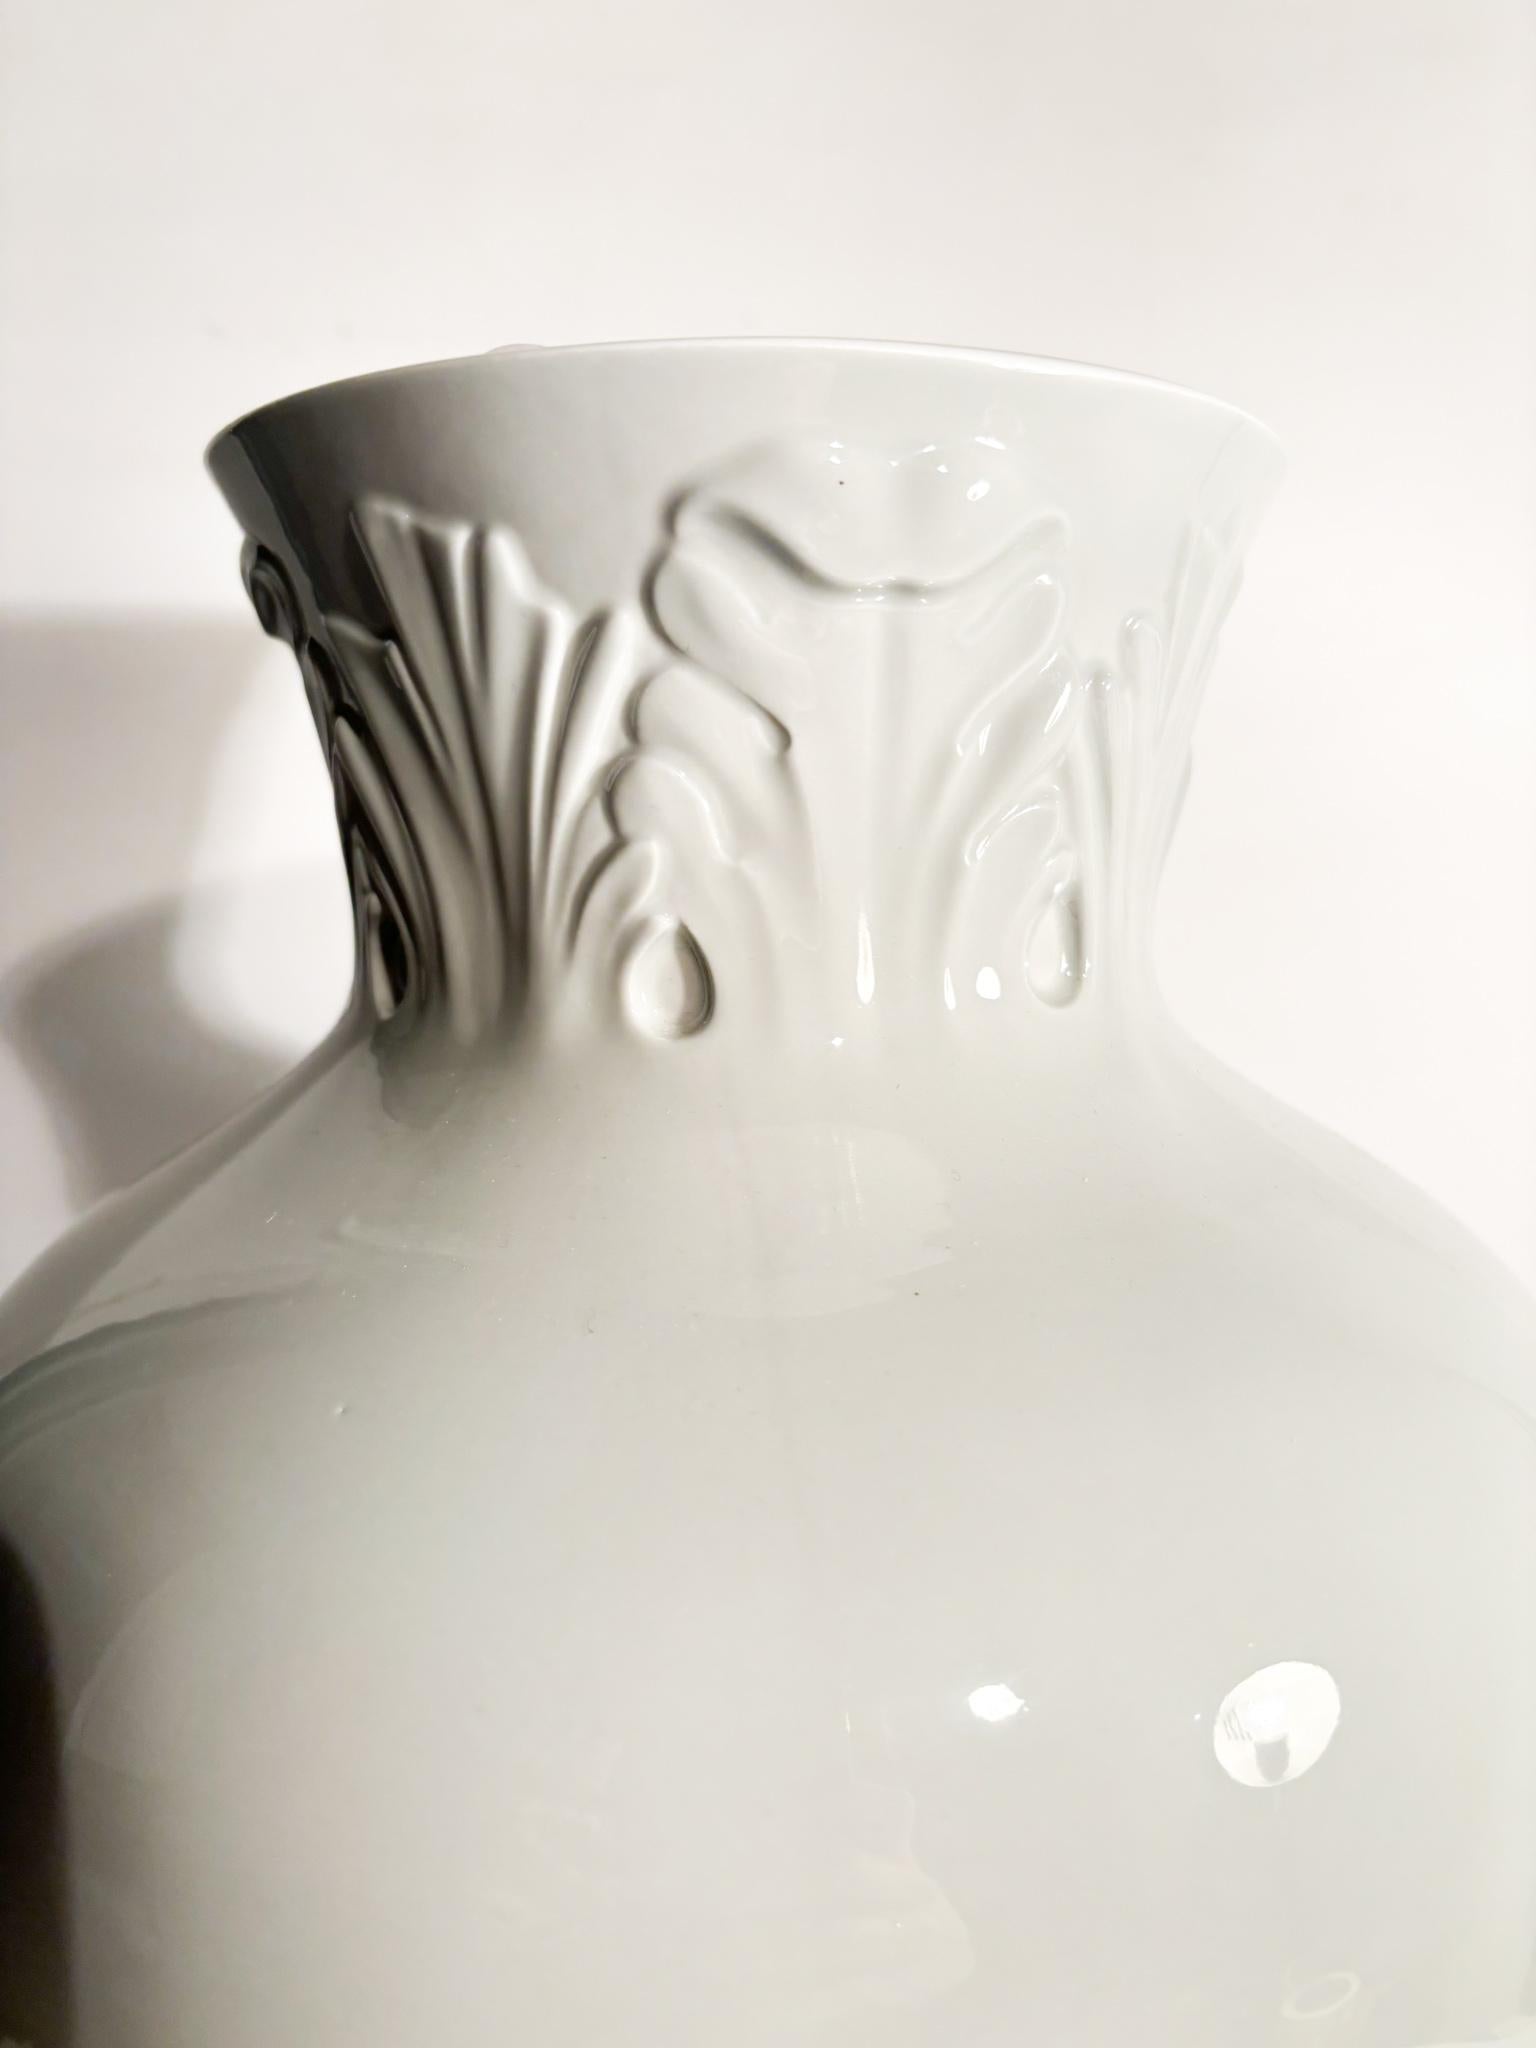 Italian Porcelain Vase by Richard Ginori Gray 'Manifattura 1946' from the 1990s For Sale